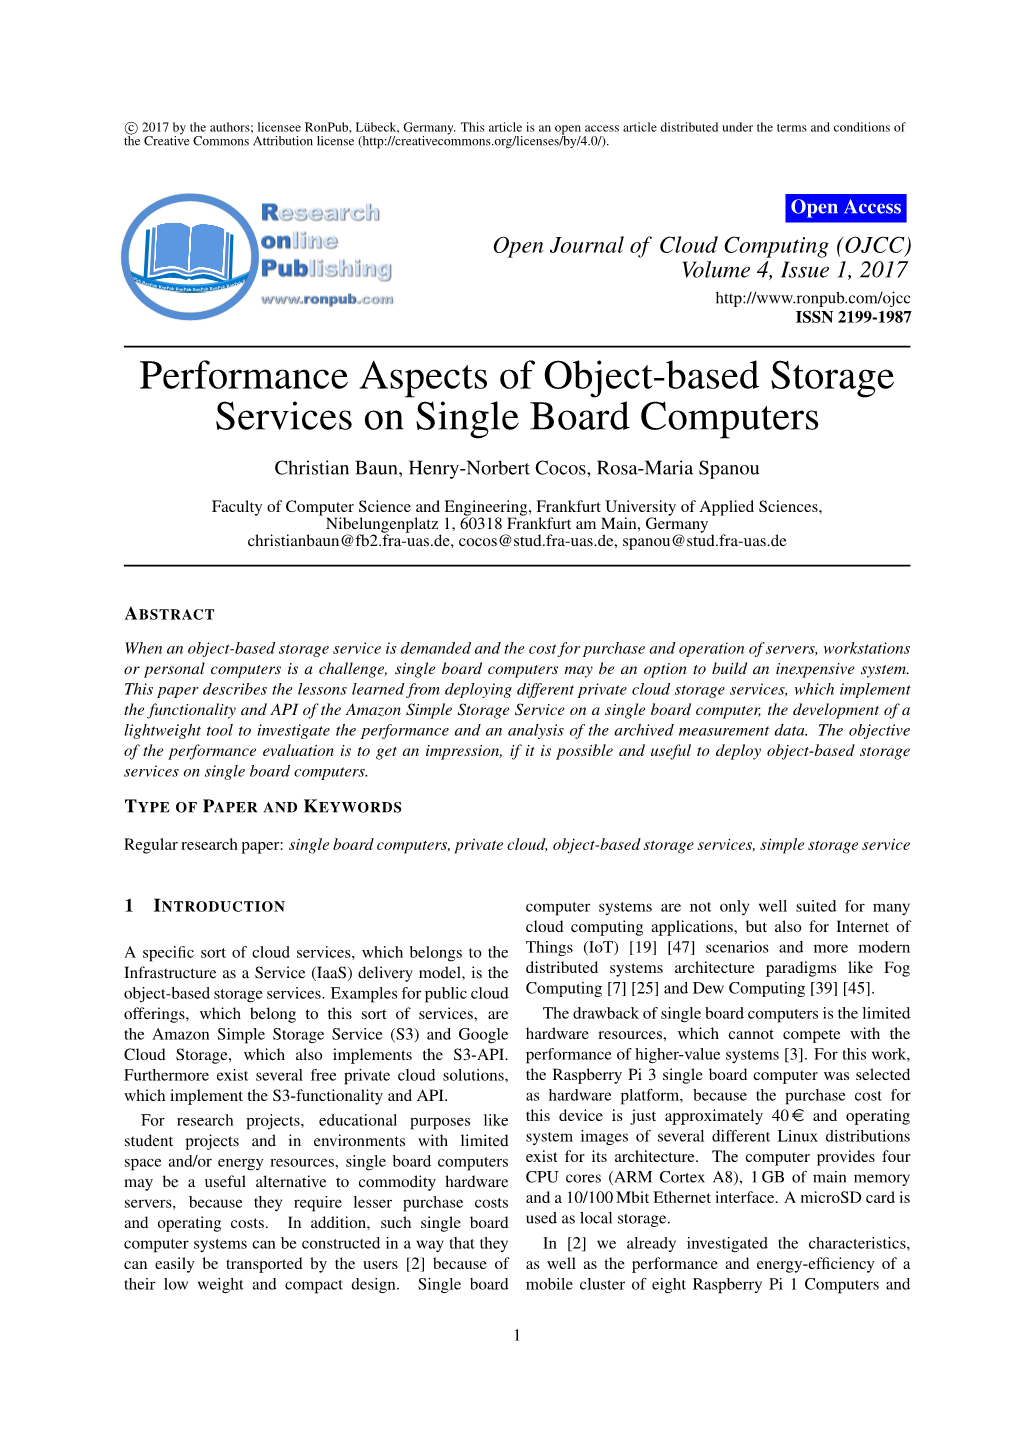 Performance Aspects of Object-Based Storage Services on Single Board Computers Christian Baun, Henry-Norbert Cocos, Rosa-Maria Spanou